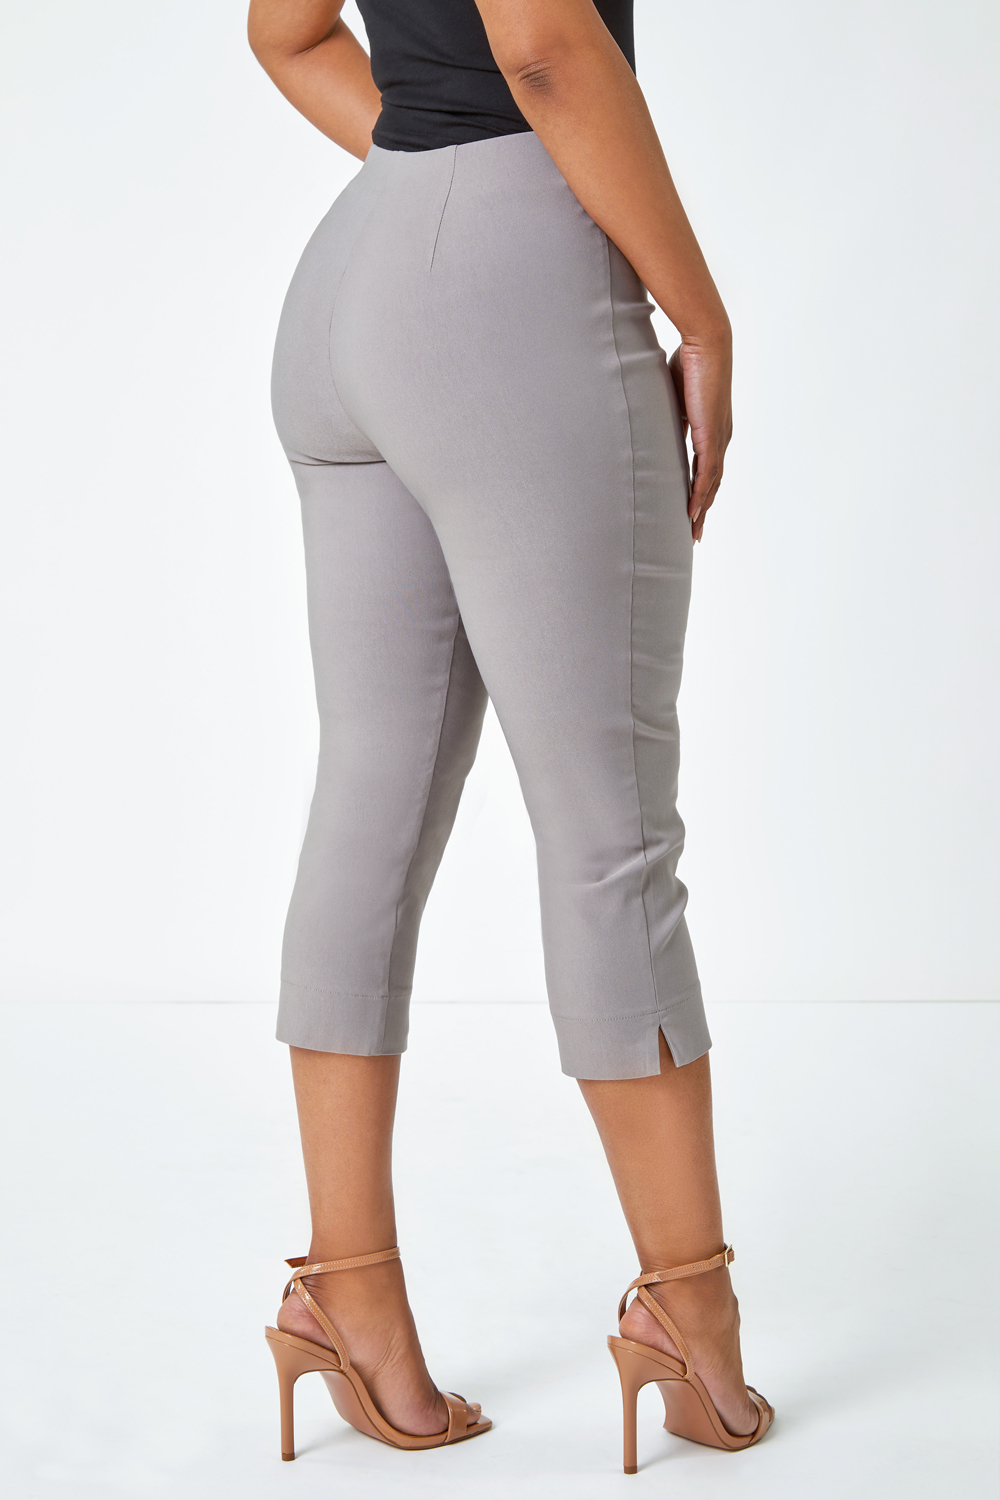 Taupe Petite Cropped Stretch Trouser, Image 3 of 5